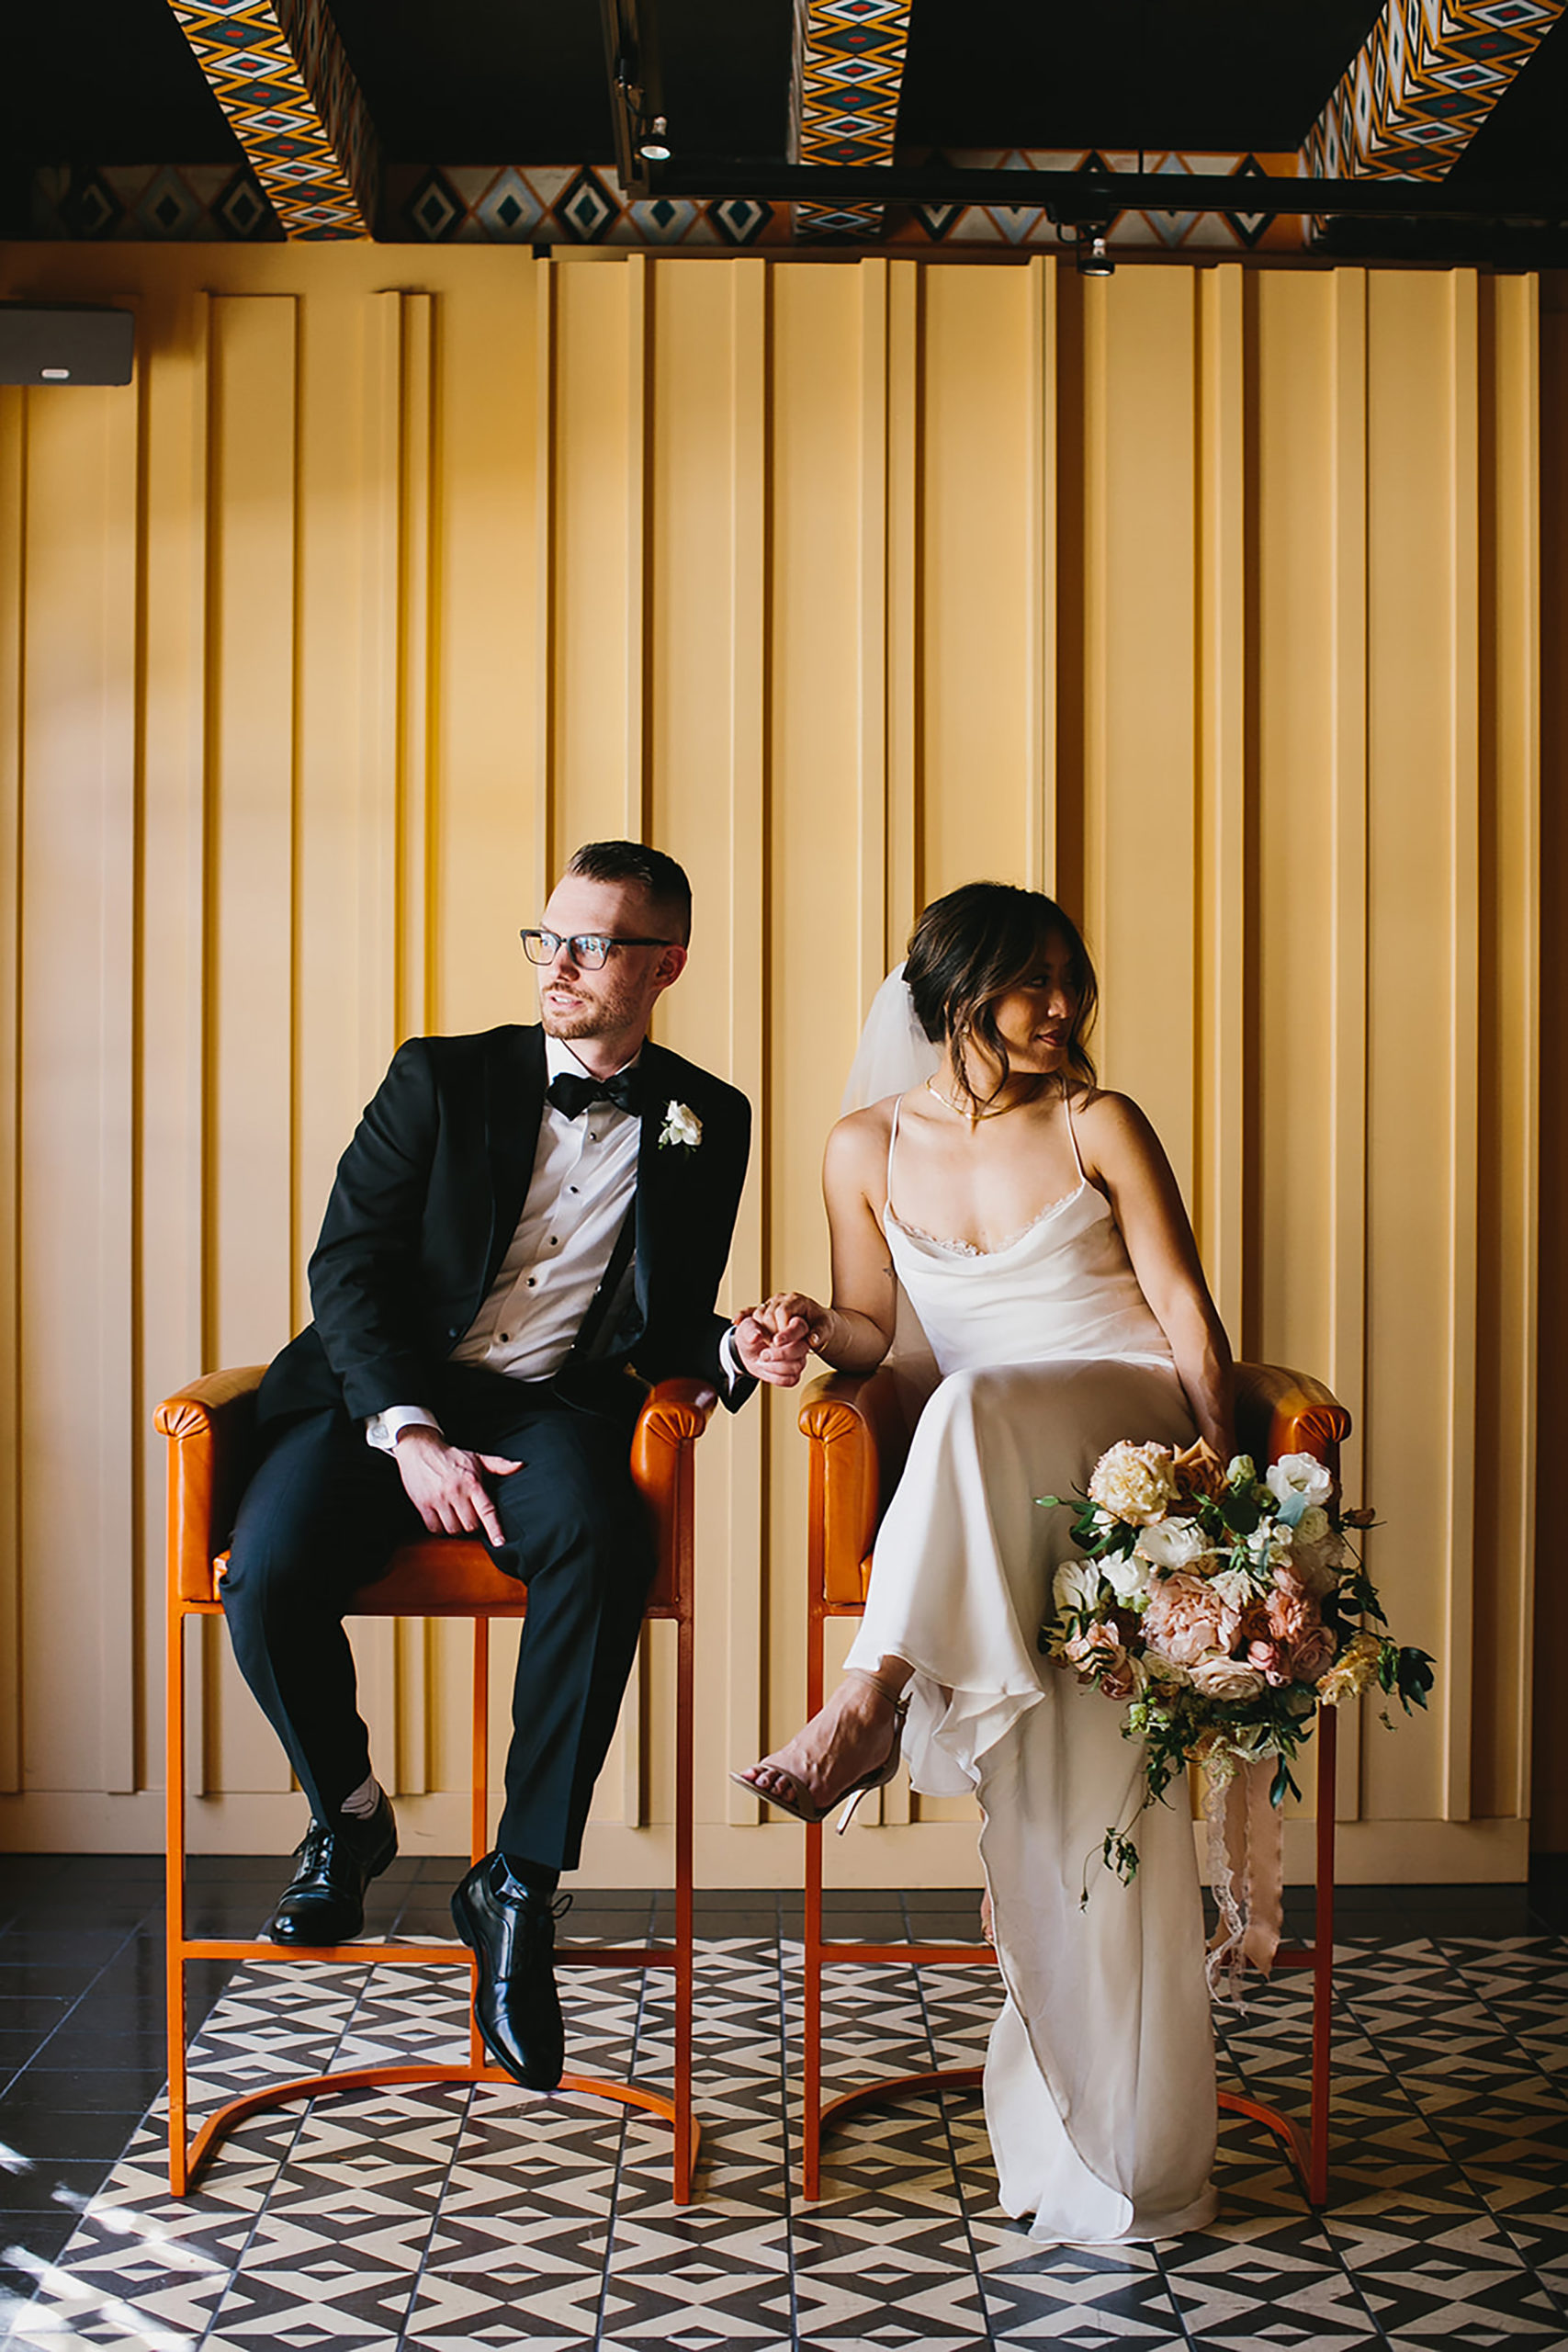 bride and groom holding hands siting in orange chairs behind a yellow wall